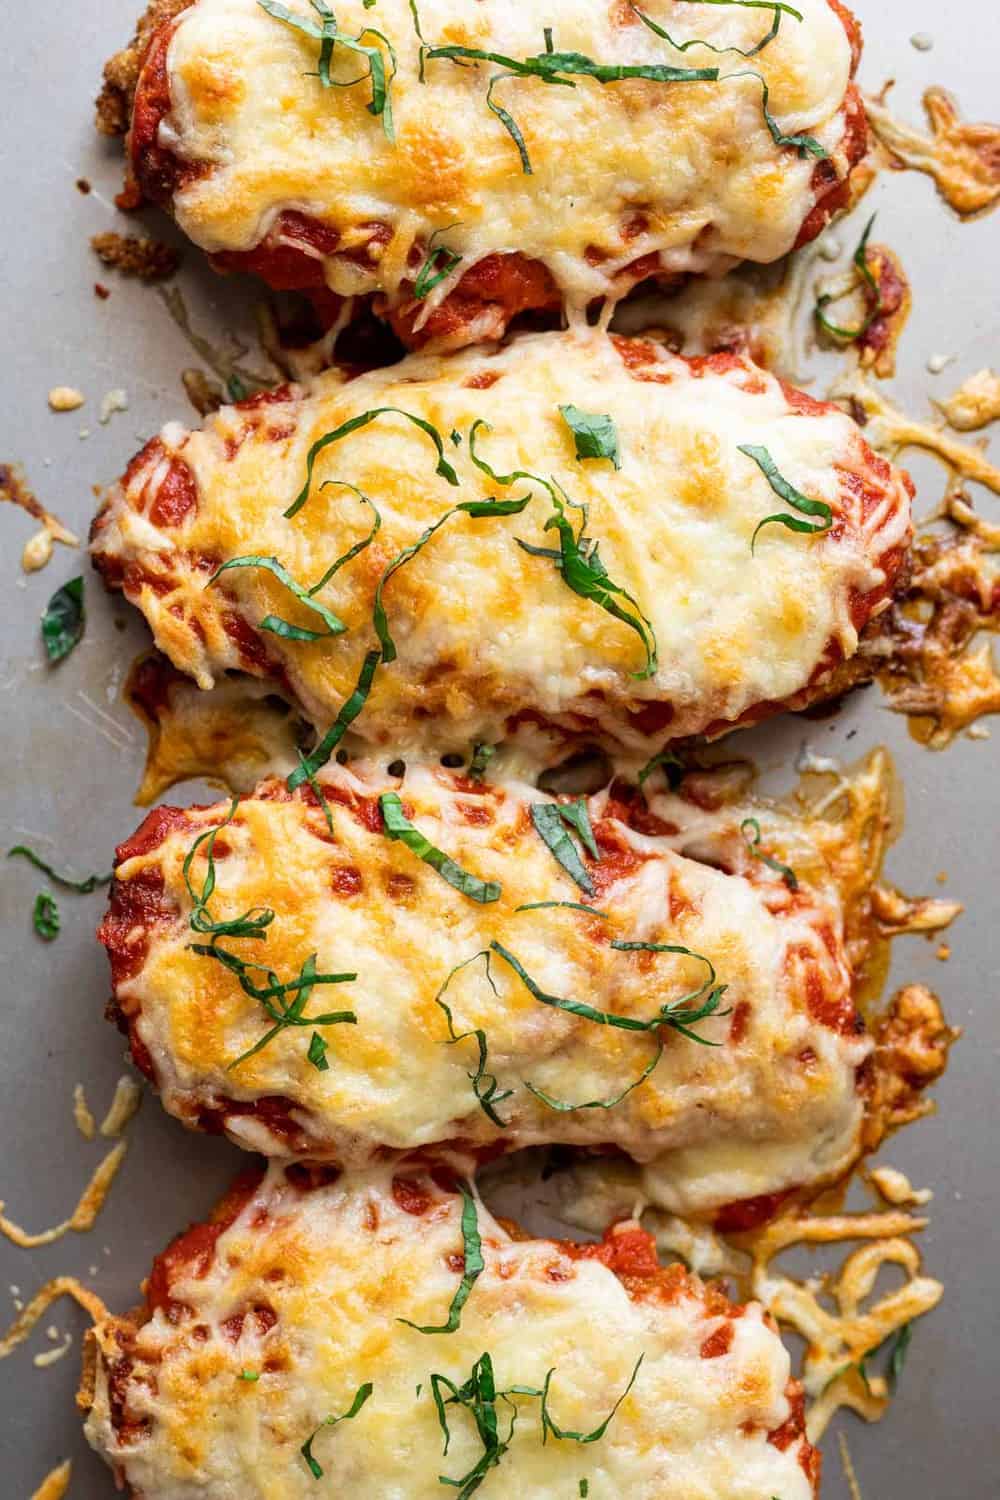 Chicken Parmesan baked and straight out of the oven on a baking tray